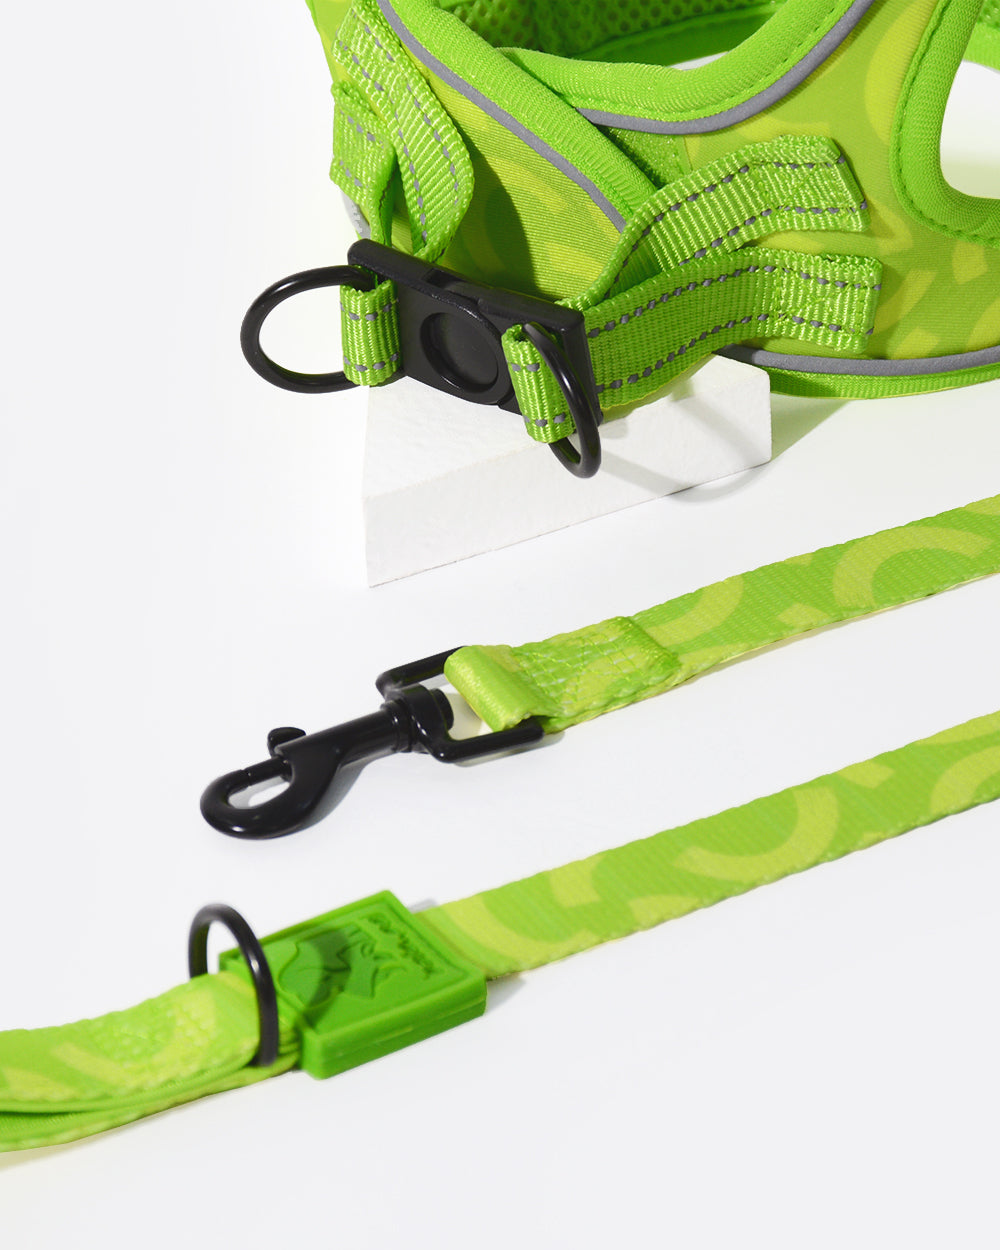 OxyMesh Step-in Harness and Leash Set - Gardener